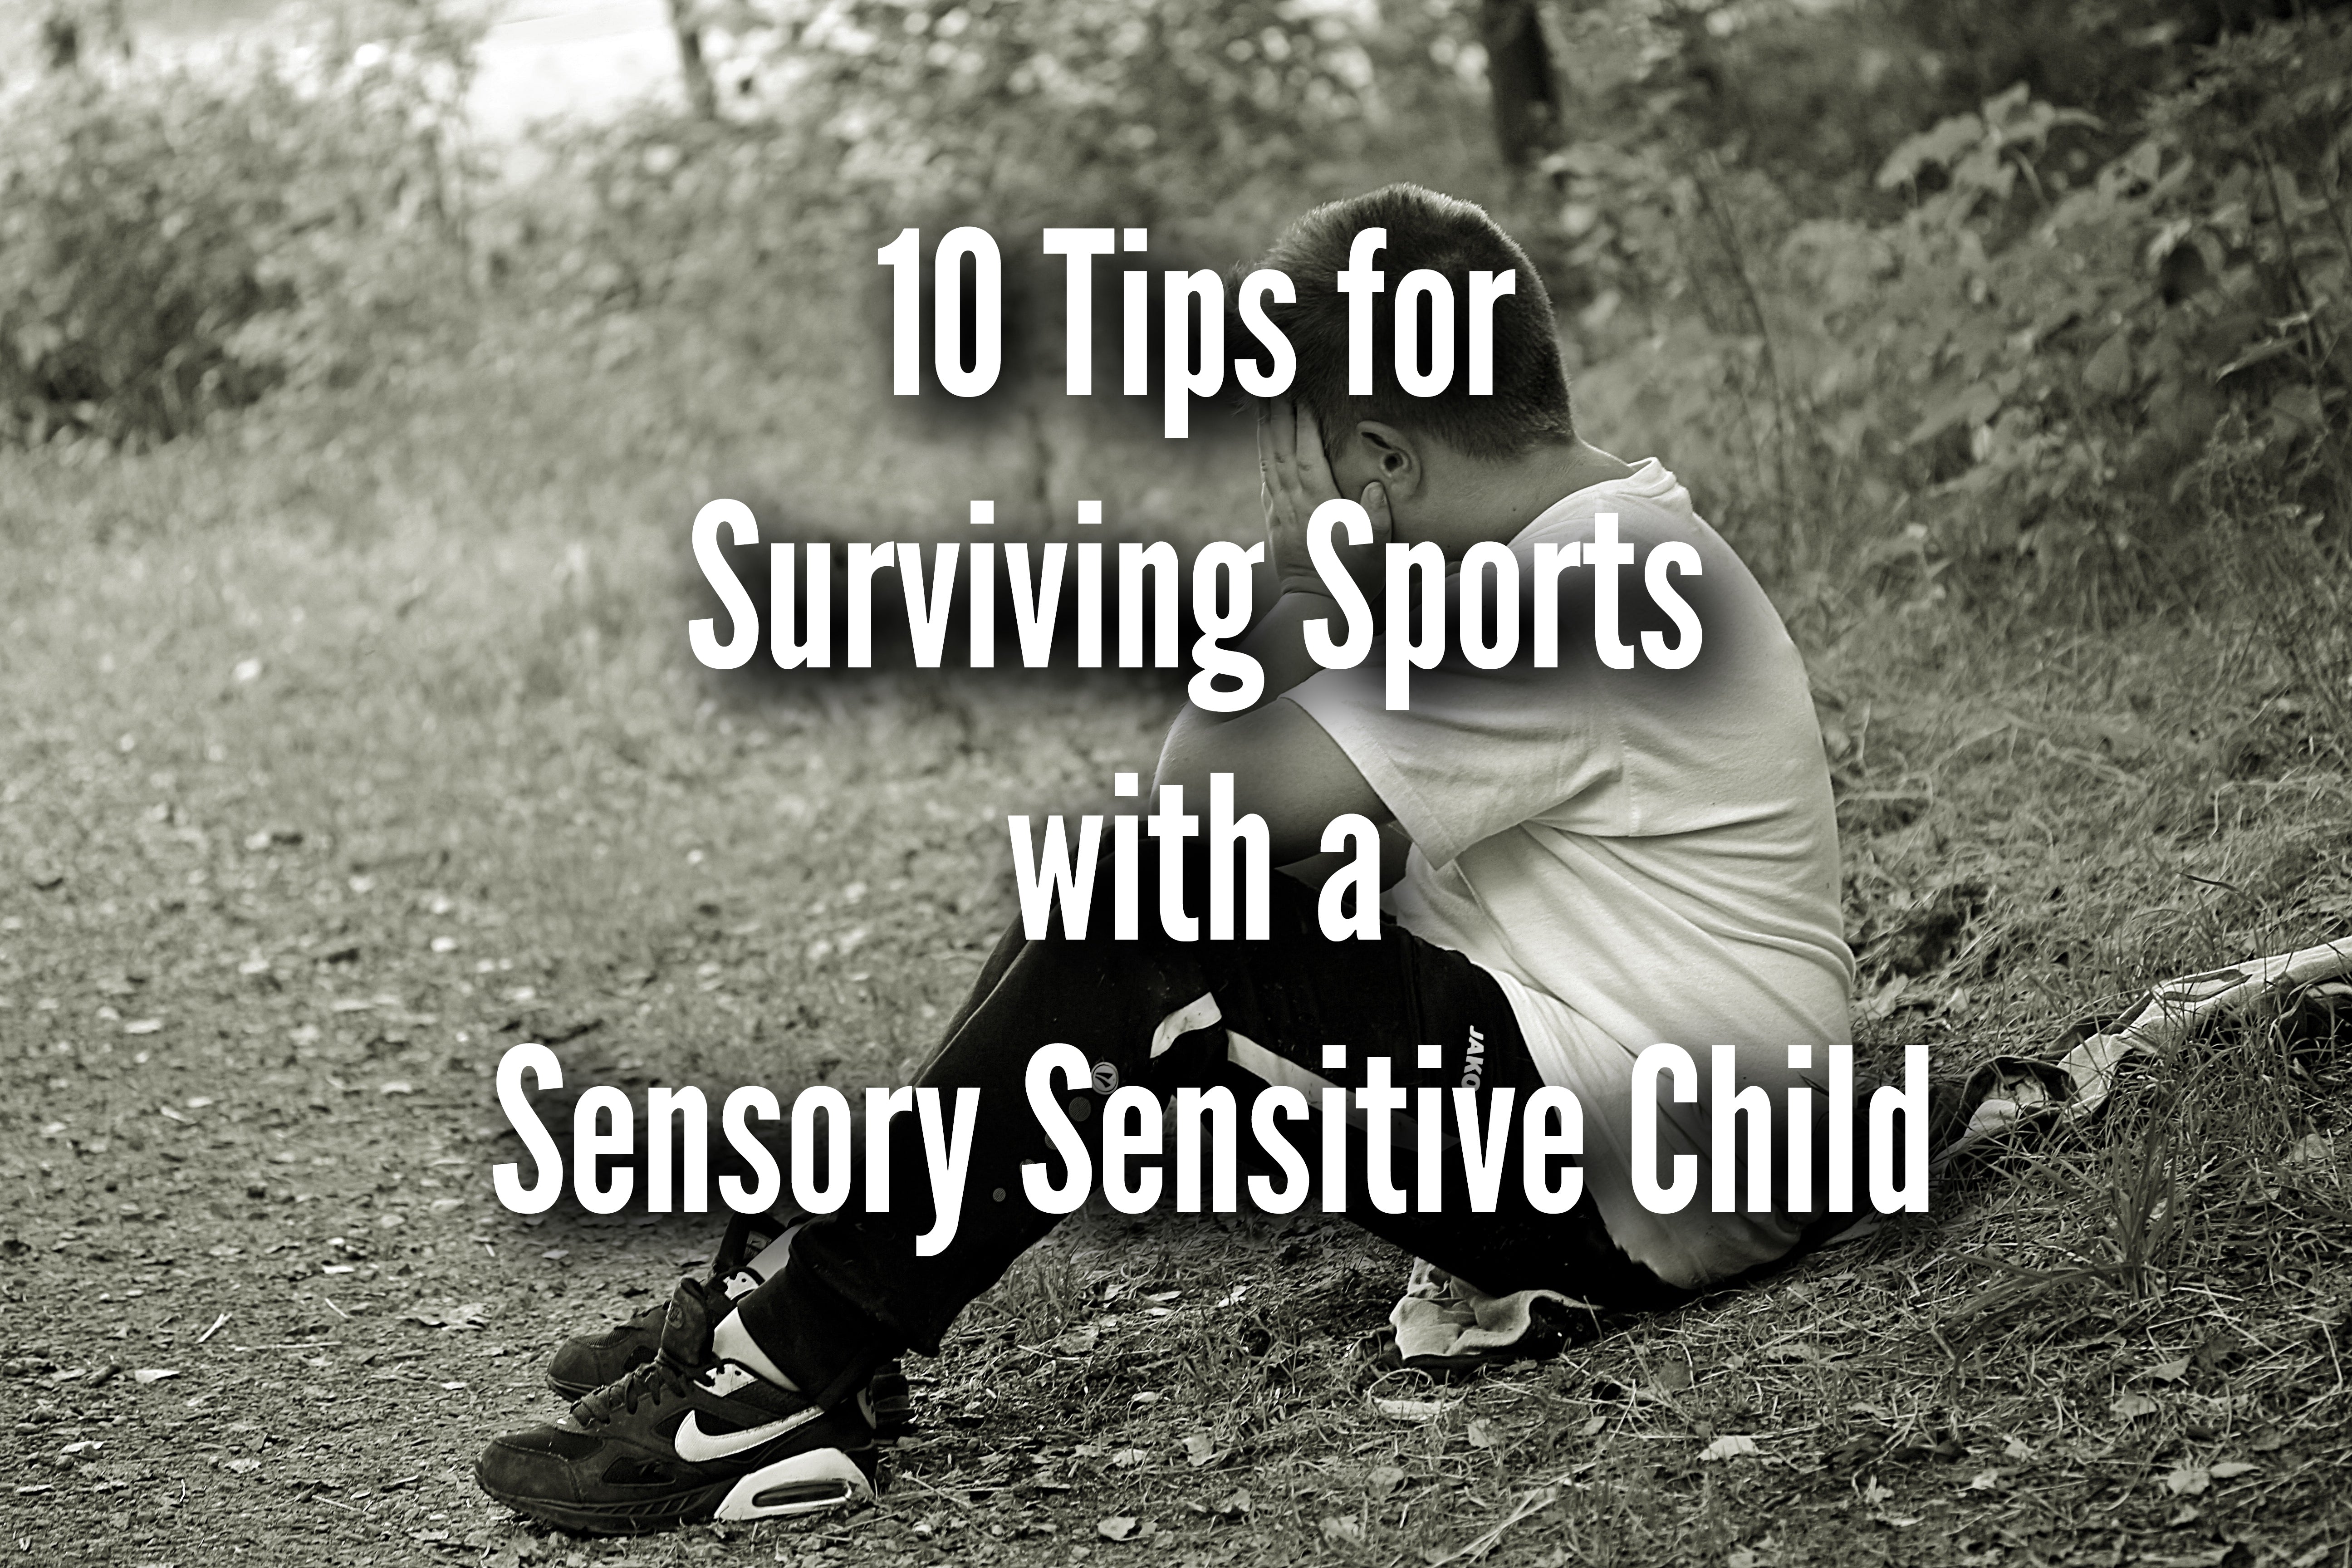 10 Tips for Surviving Sports with a Sensory Sensitive Child